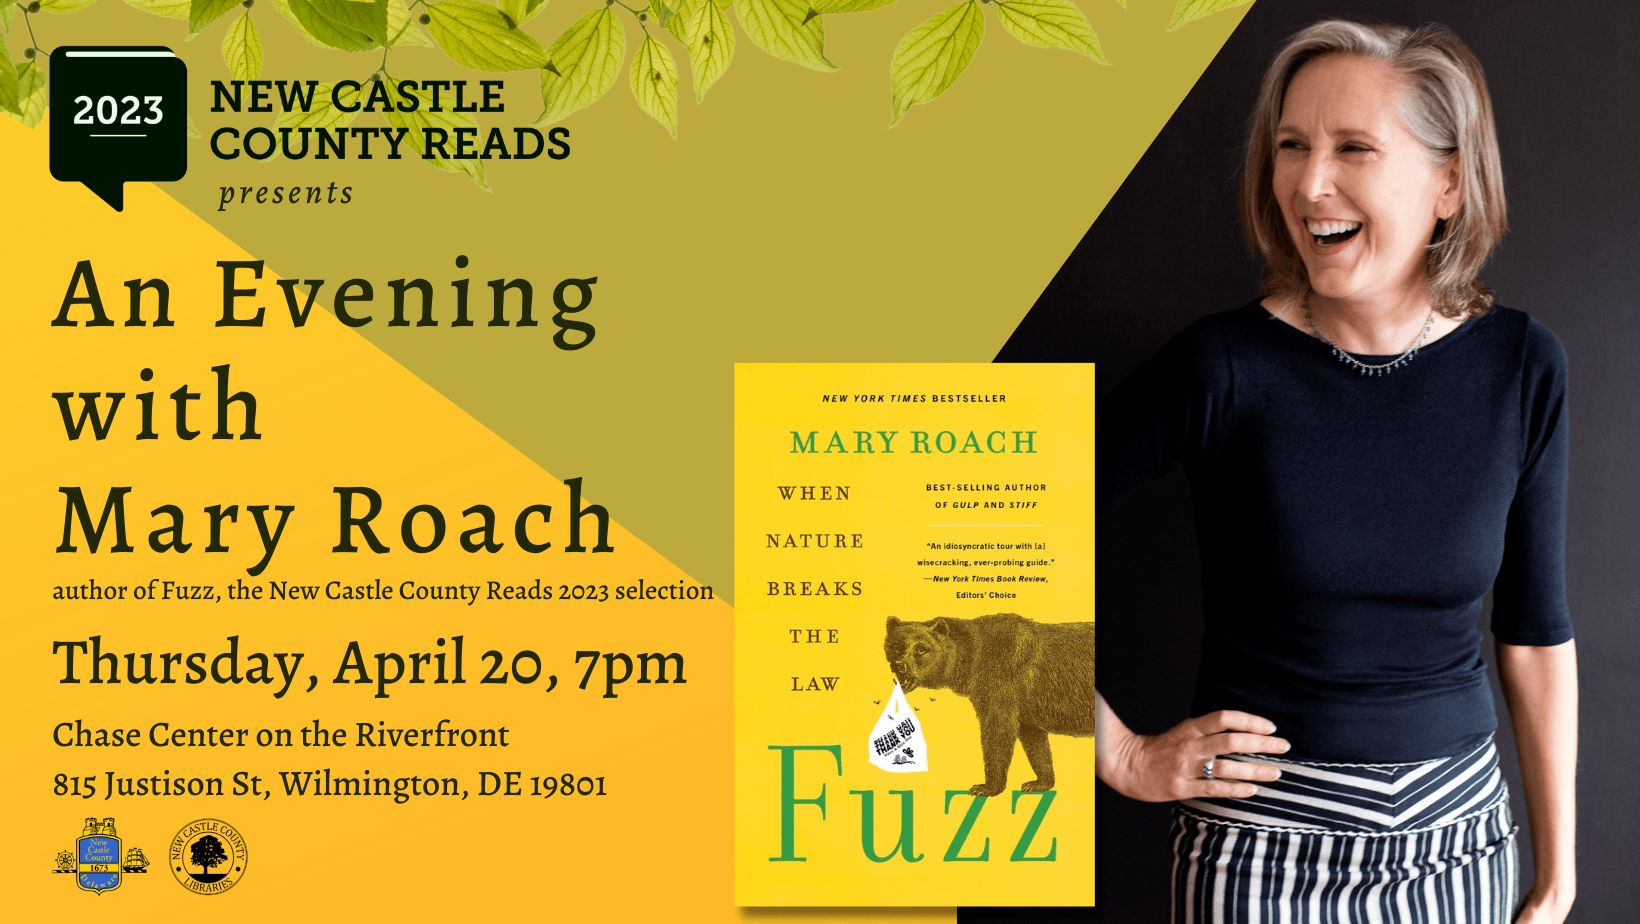 Evening with Mary Roach - New Castle County Reads, Wilmington, Delaware, United States